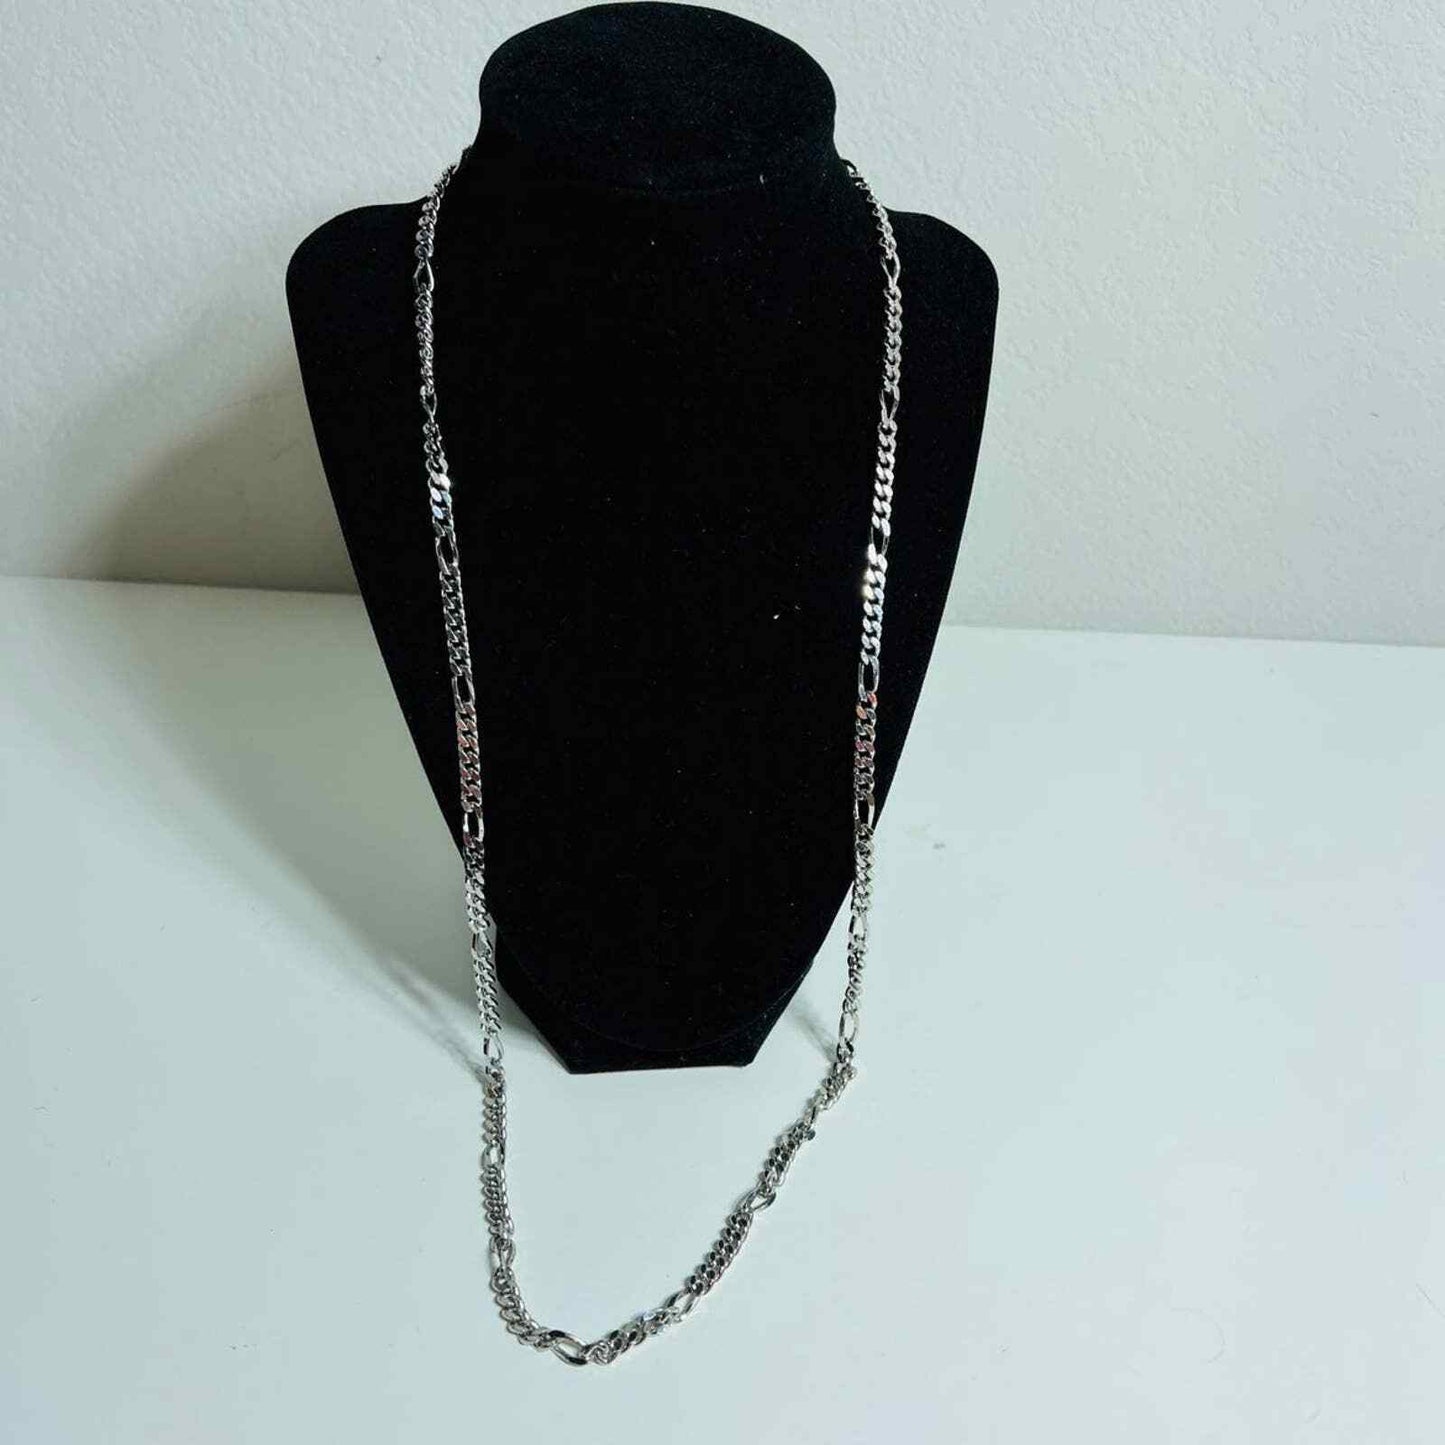 Monet Necklace Figaro Silver Tone Chain 30" Long Fashion Jewelry Woman Costume